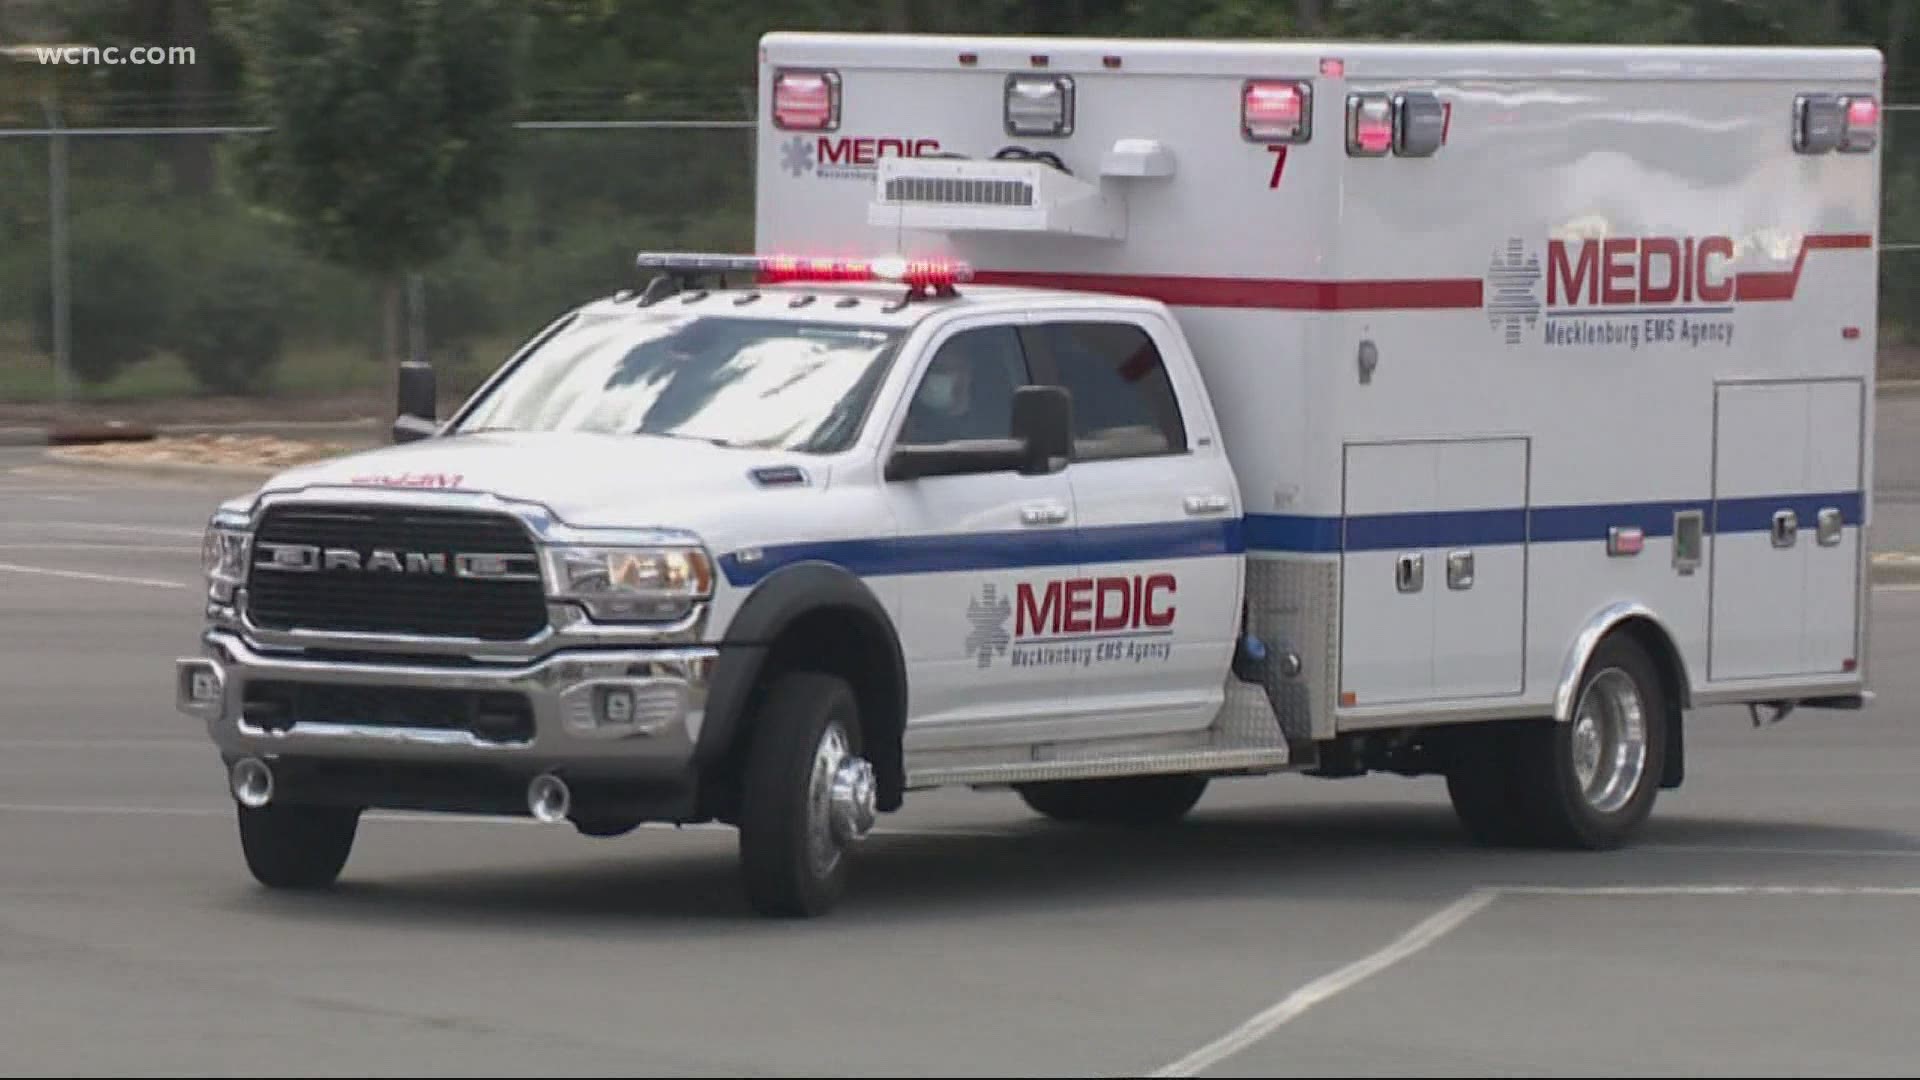 Union EMS said their crews are currently stationed at the county health department, but it’s possible they could respond to homes in the future.